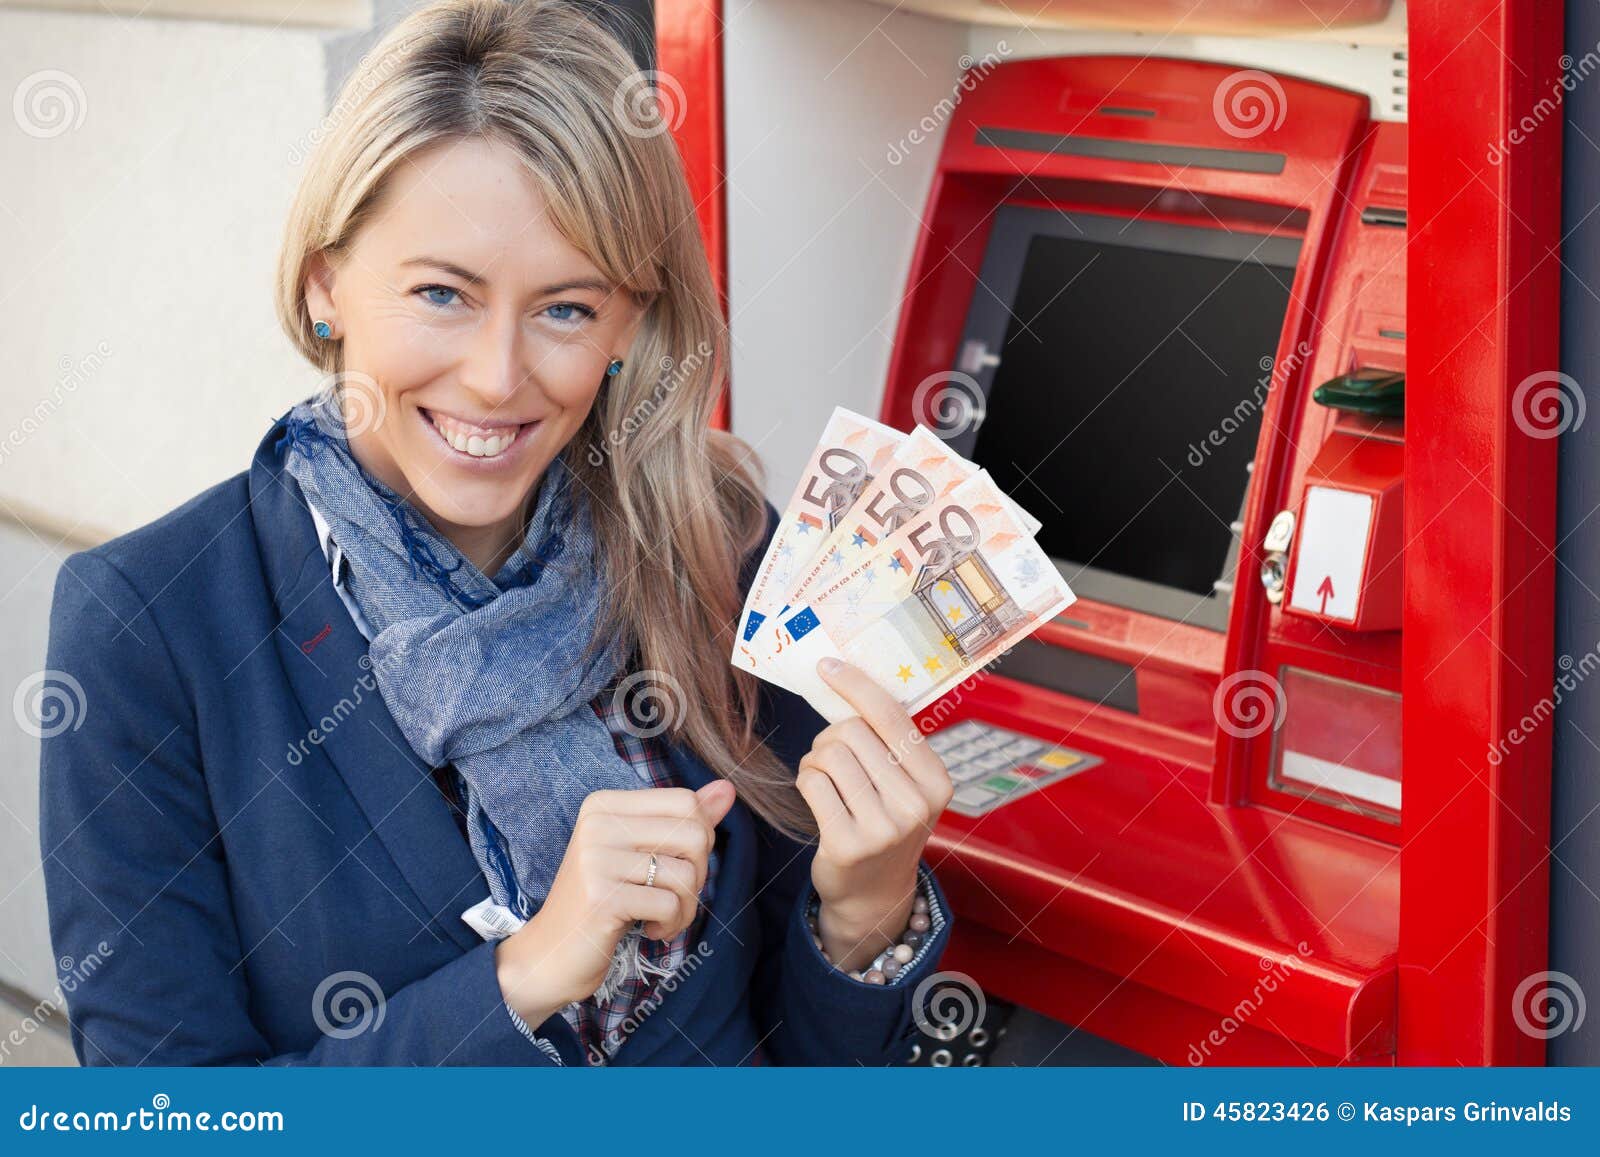 happy woman withdrawing cash from atm